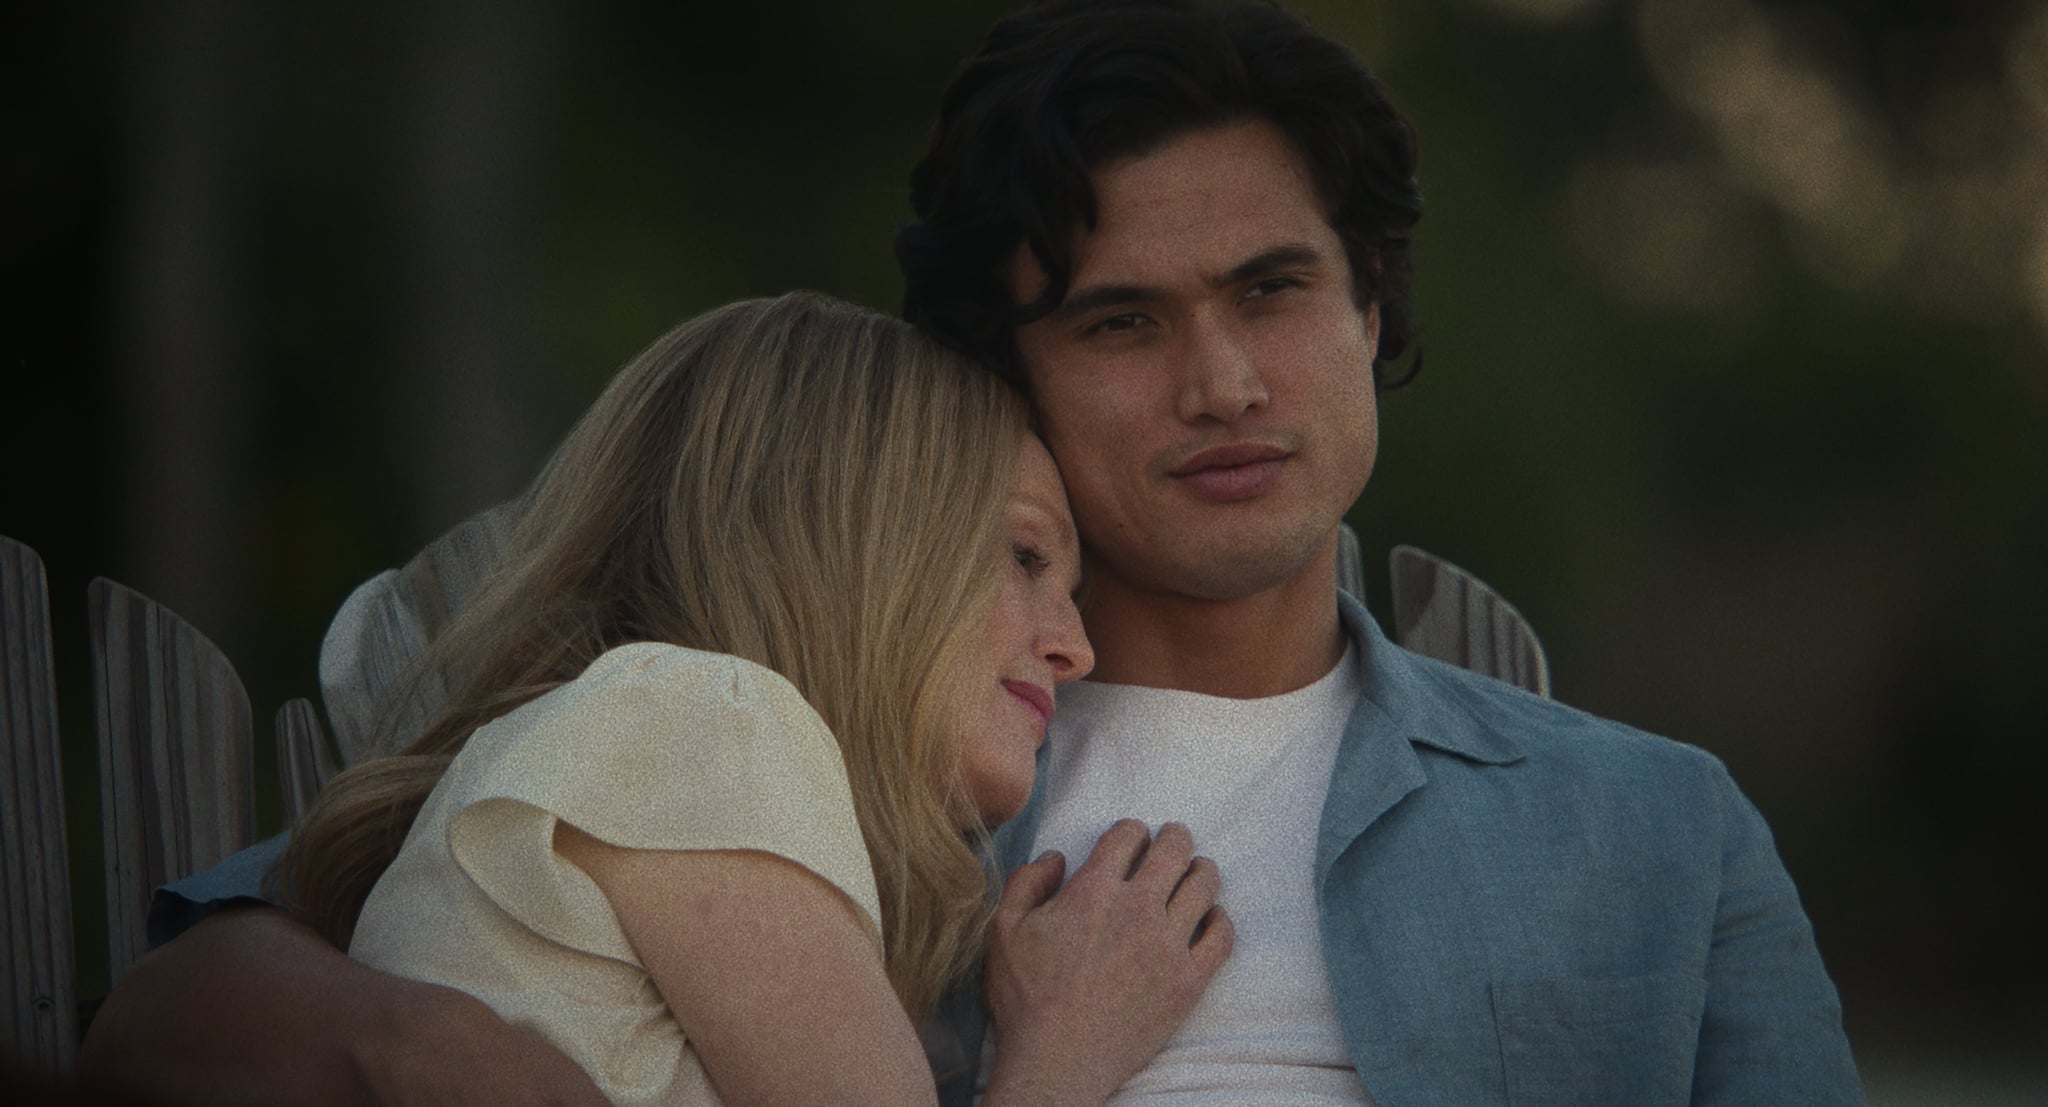  Julianne Moore as Gracie Atherton-Yoo with Charles Melton as Joe. Cr. Courtesy of Netflix